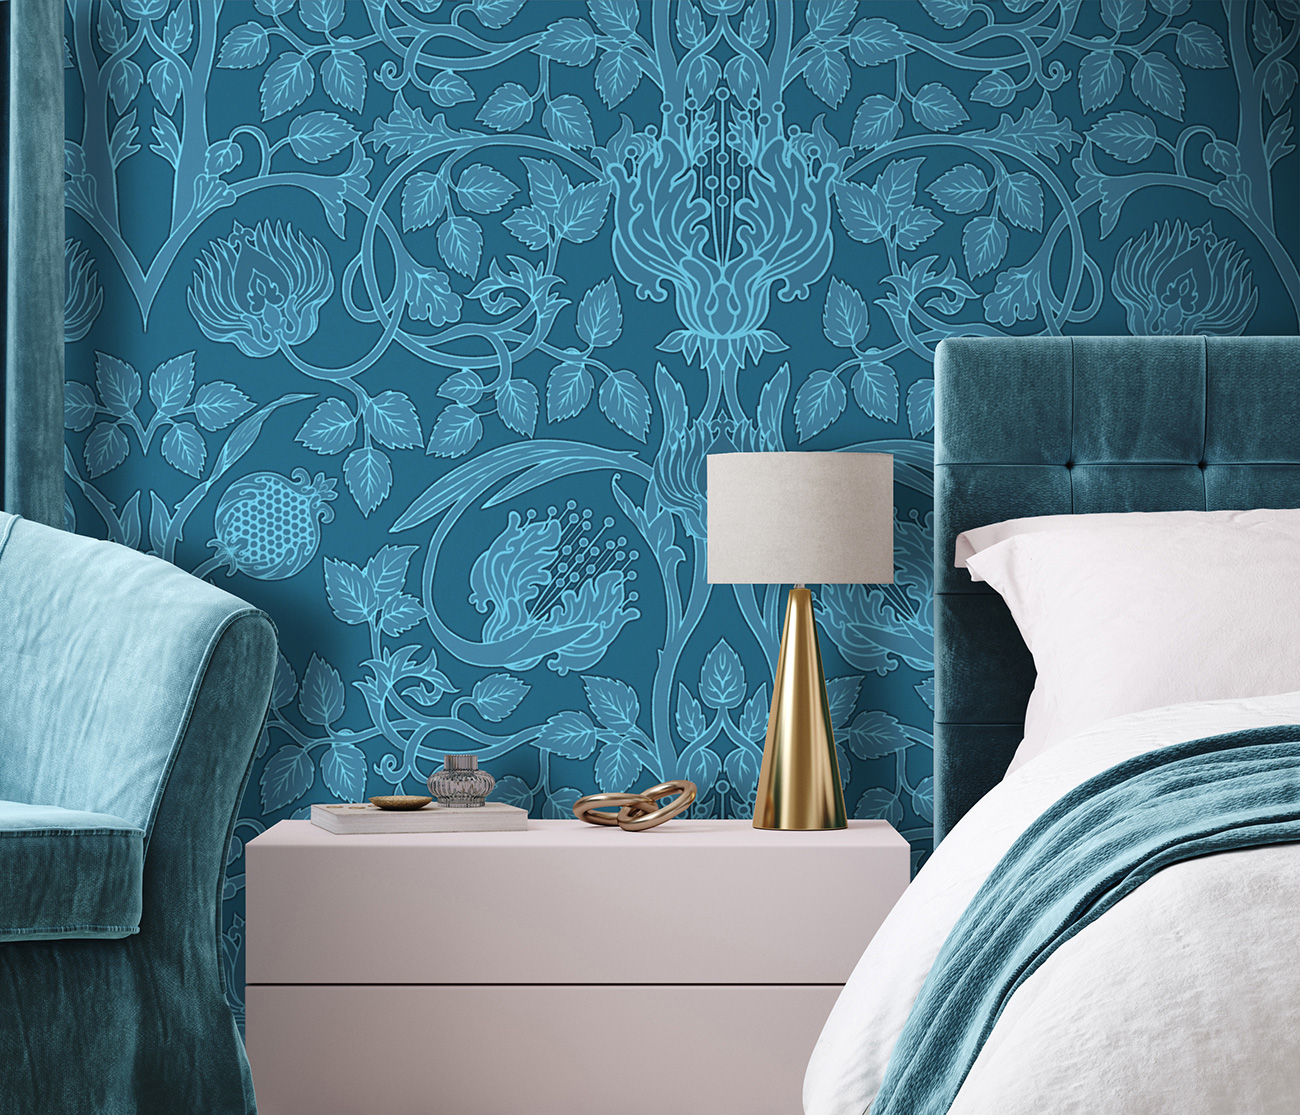 Damask wallpaper with petrol blue floral pattern which adorns a bedroom